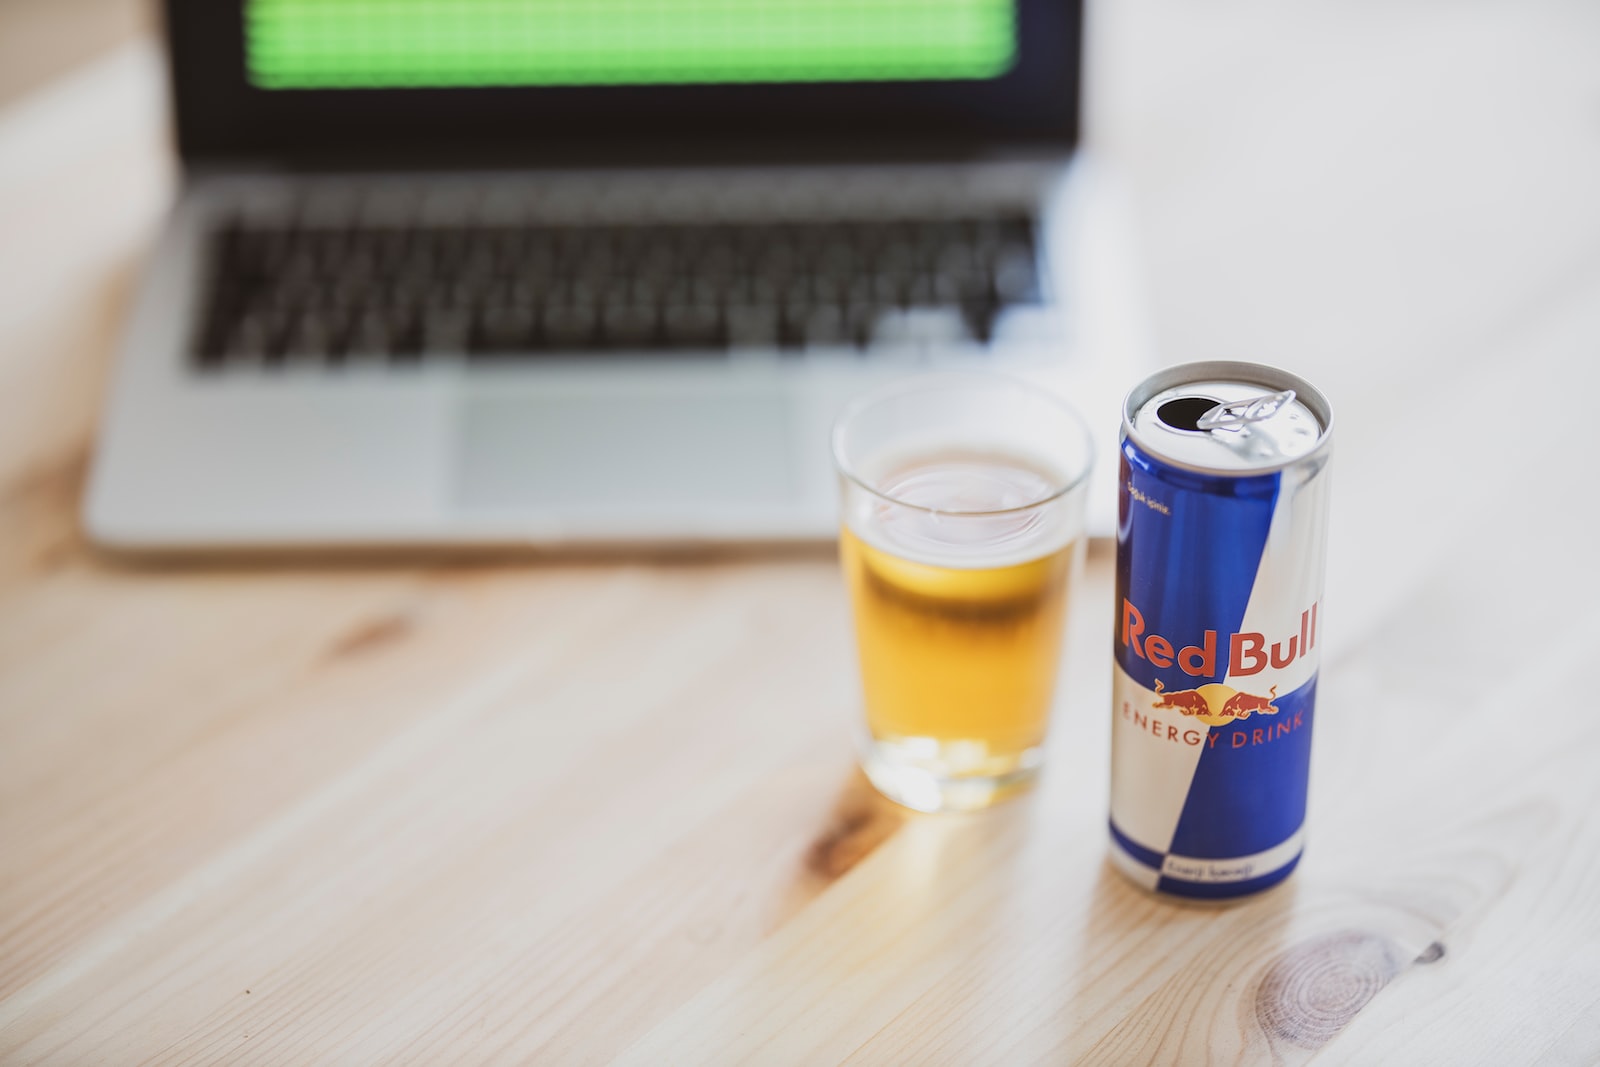 How Long Does It Take to Pee Out an Energy Drink?